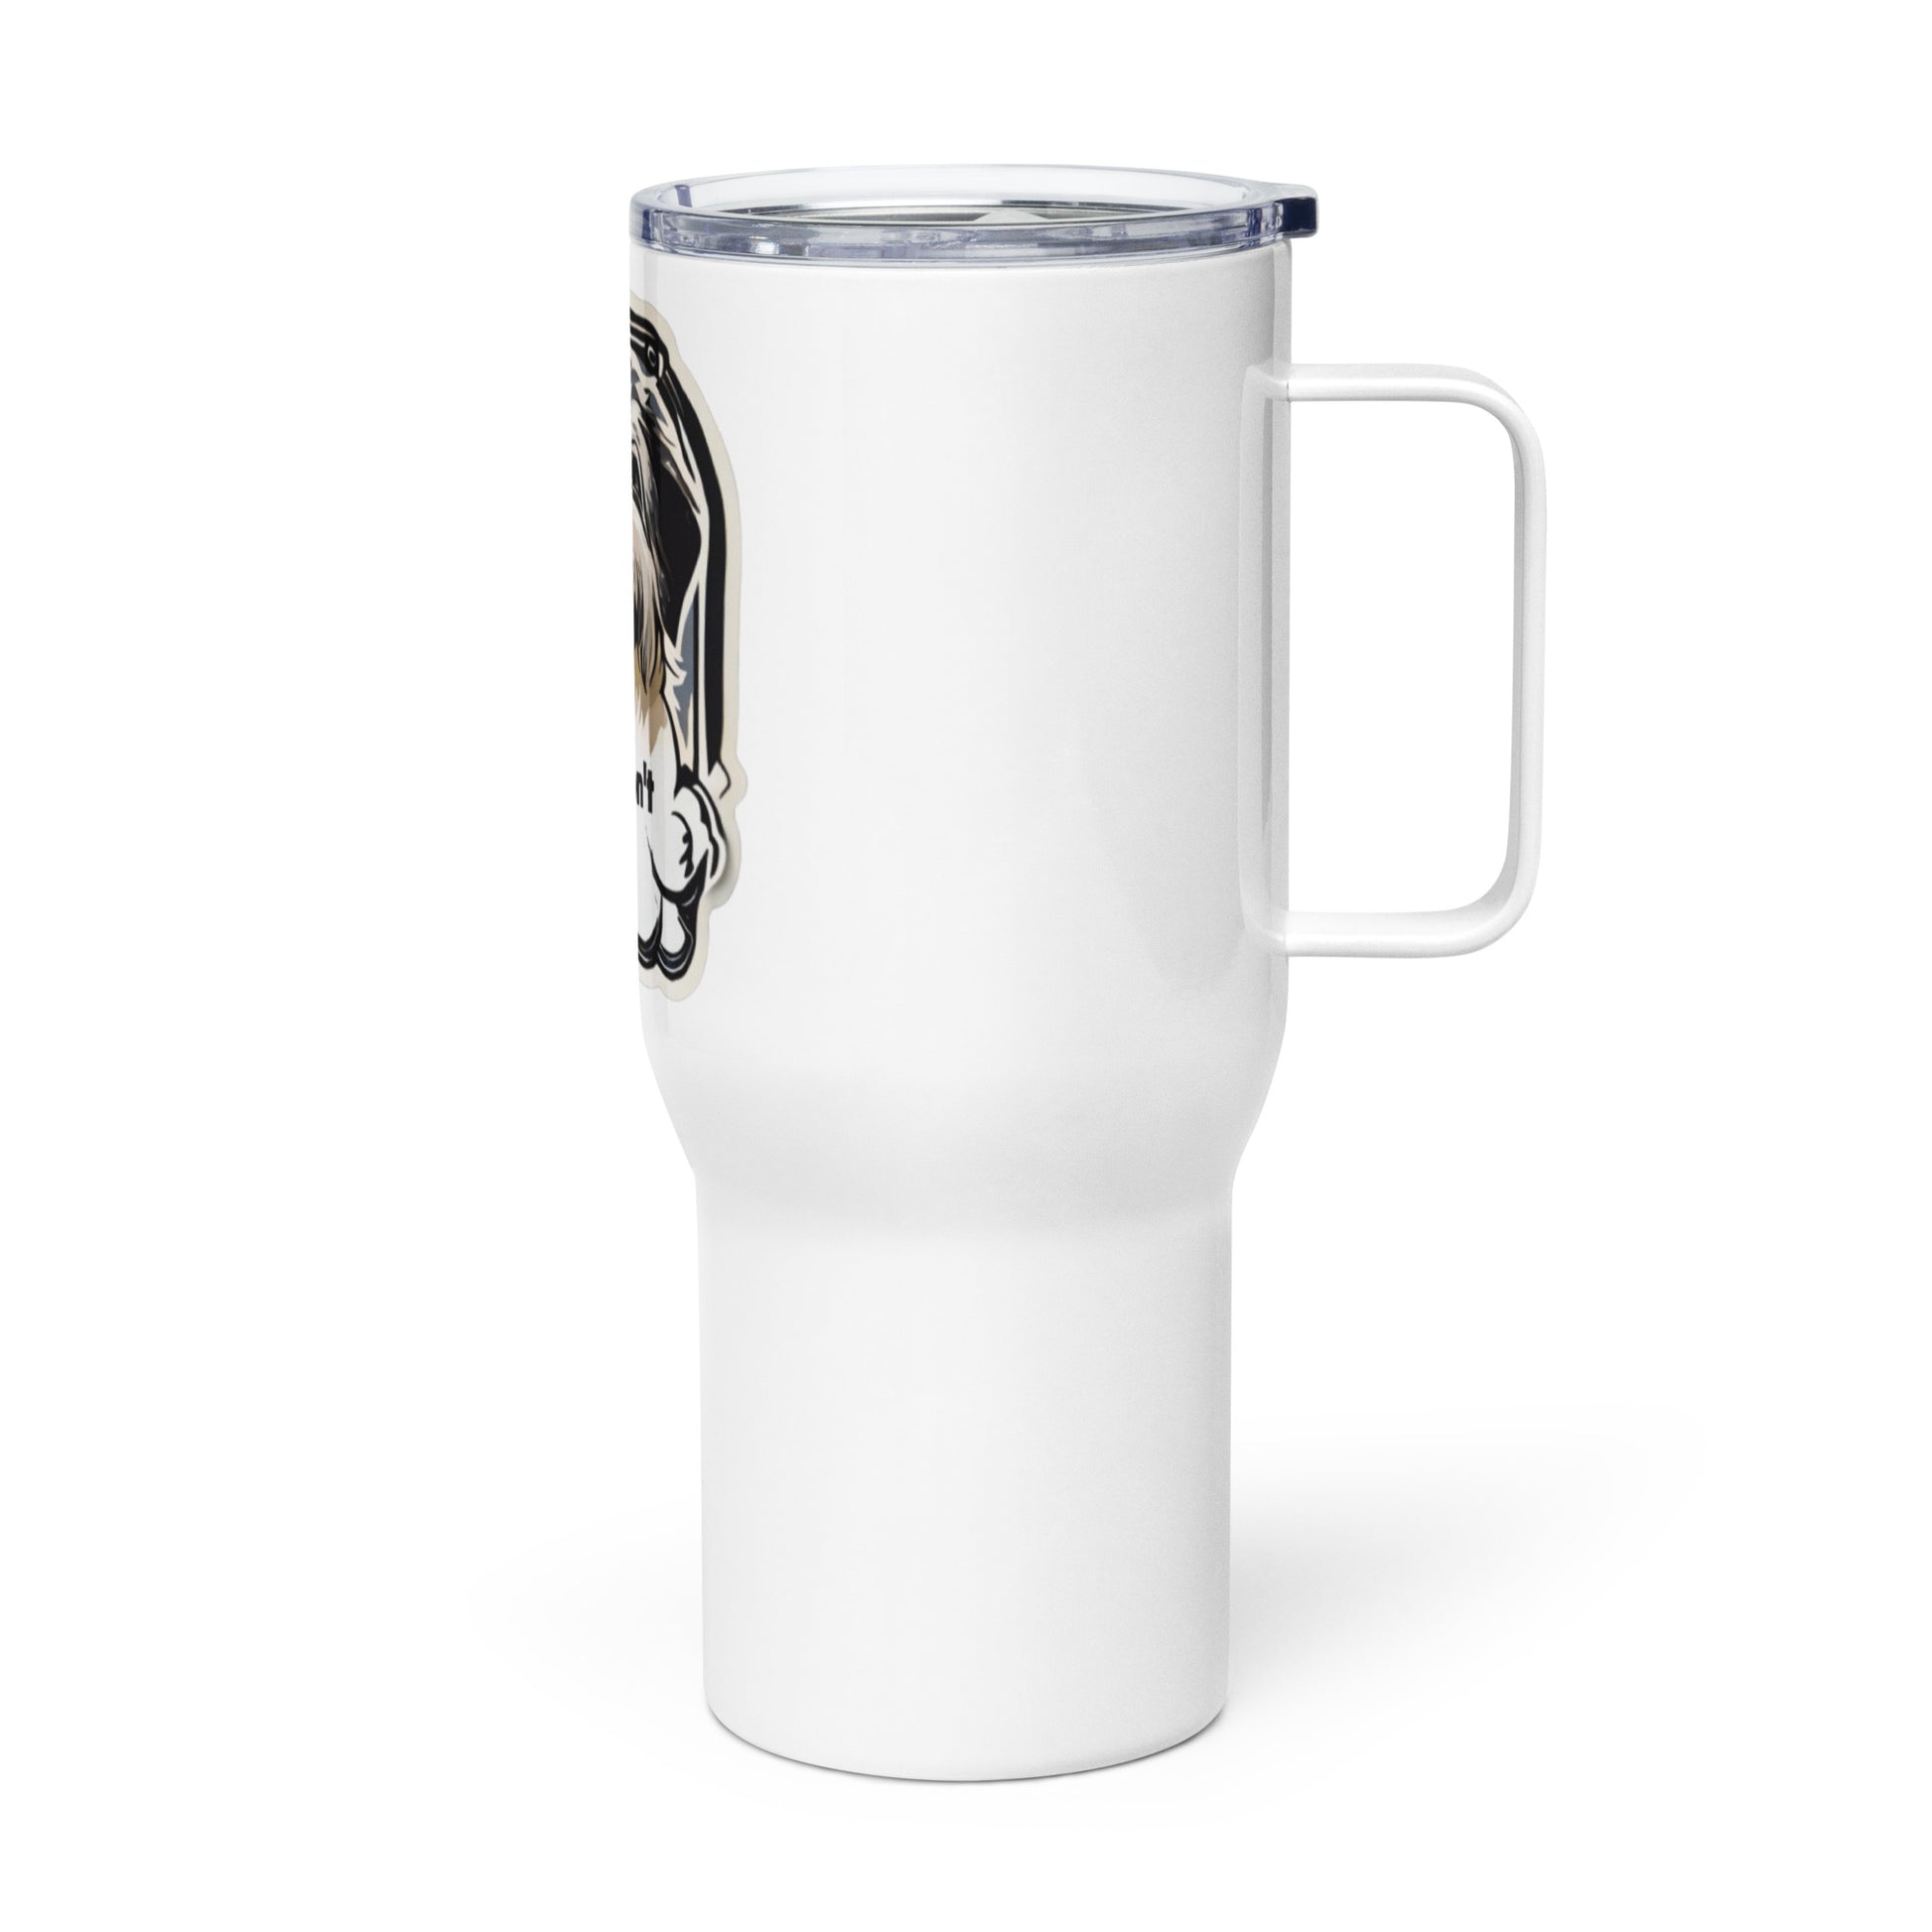 Stay hydrated in style with this 25 oz travel mug, featuring an endearing dog illustration and the heartfelt message 'Adopt Don't Shop.' A must-have accessory for dog enthusiasts who are passionate about promoting animal adoption.